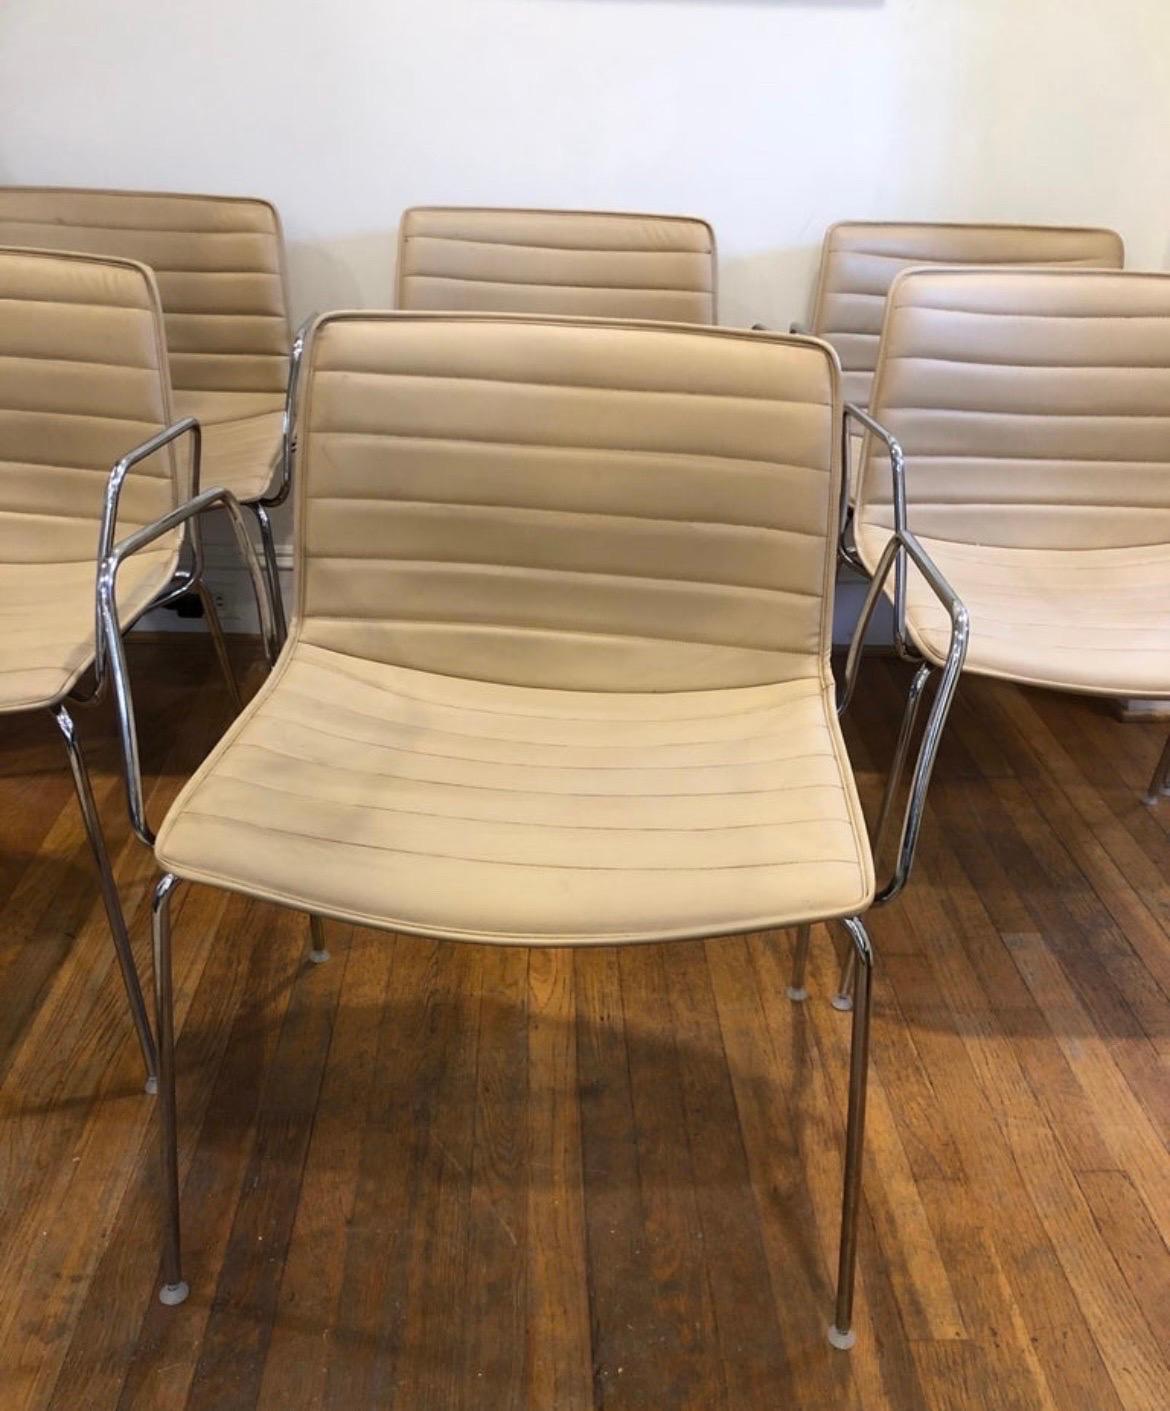 Arper Catifa 53 Chairs - Tan Leather with Steel Base and Arms - 10 Available For Sale 4